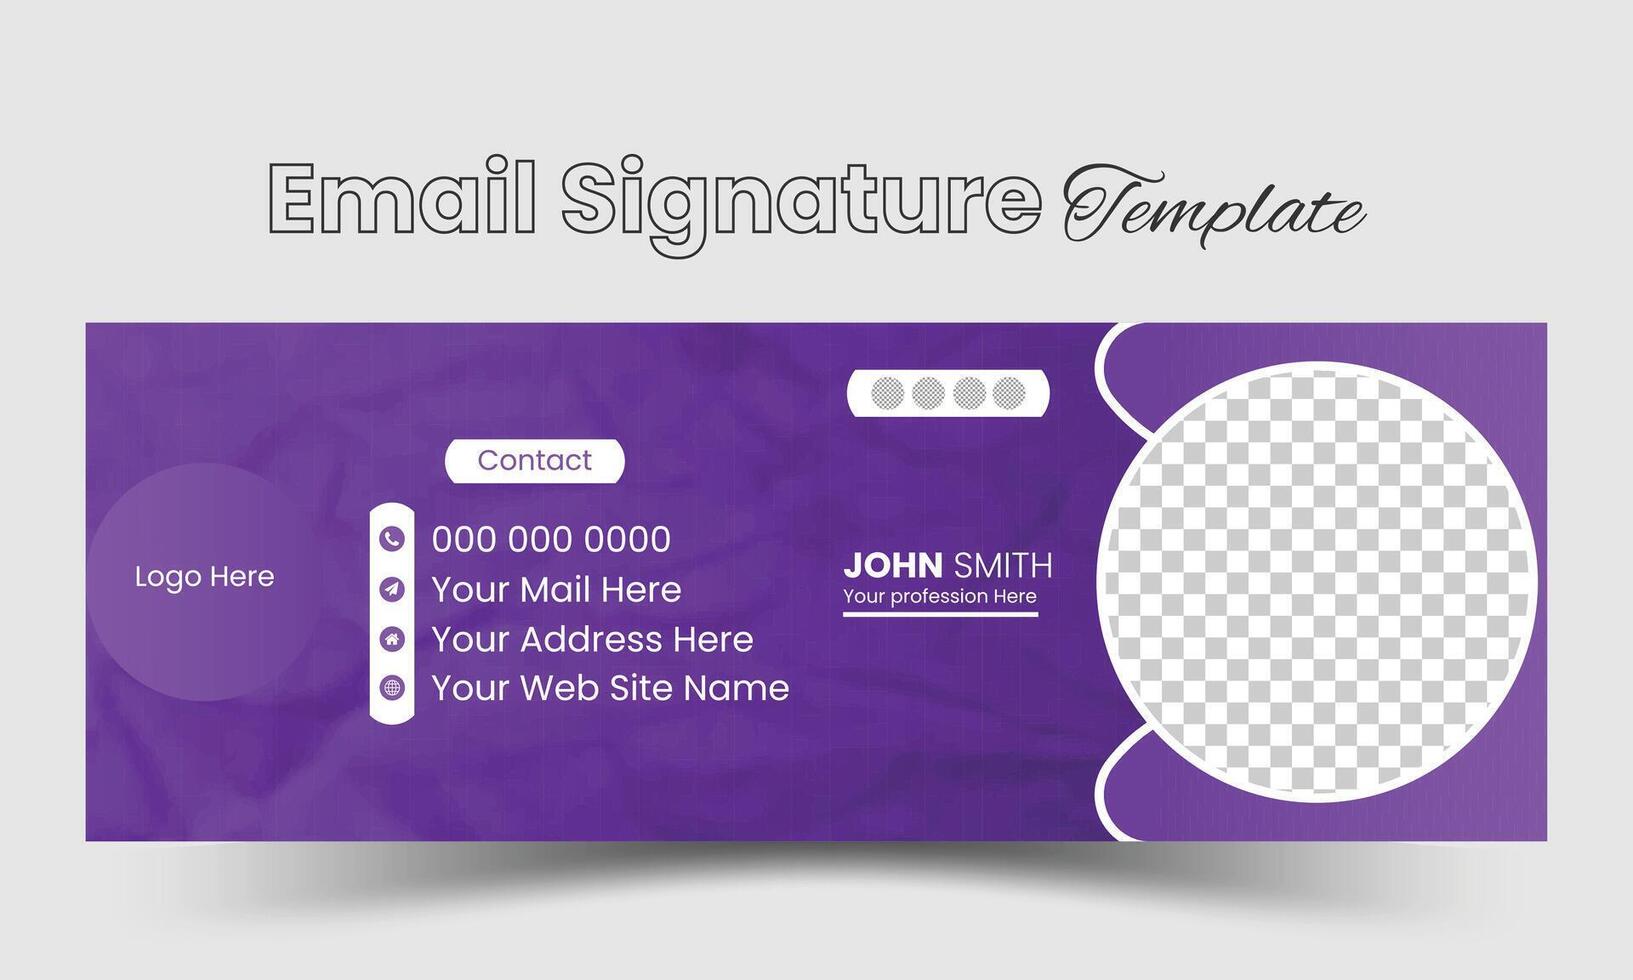 e-mail handtekening, e-mail footer sjabloon, sociaal media Hoes of contact kaart vector